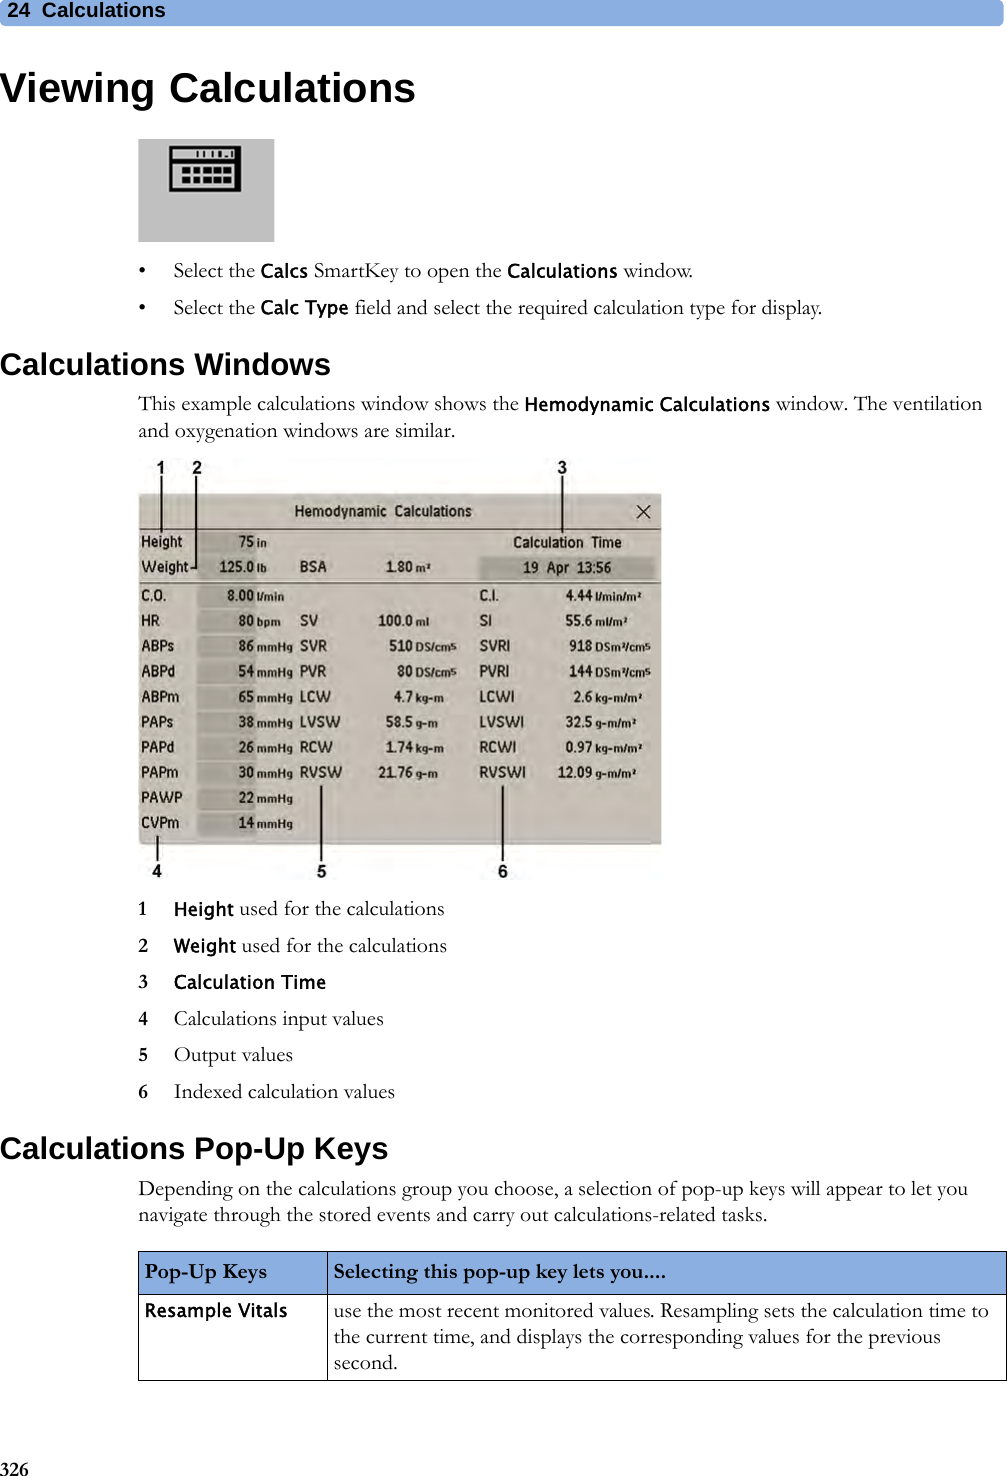 24 Calculations326Viewing Calculations• Select the Calcs SmartKey to open the Calculations window.• Select the Calc Type field and select the required calculation type for display.Calculations WindowsThis example calculations window shows the Hemodynamic Calculations window. The ventilation and oxygenation windows are similar.1Height used for the calculations2Weight used for the calculations3Calculation Time4Calculations input values5Output values6Indexed calculation valuesCalculations Pop-Up KeysDepending on the calculations group you choose, a selection of pop-up keys will appear to let you navigate through the stored events and carry out calculations-related tasks.Pop-Up Keys Selecting this pop-up key lets you....Resample Vitals use the most recent monitored values. Resampling sets the calculation time to the current time, and displays the corresponding values for the previous second.